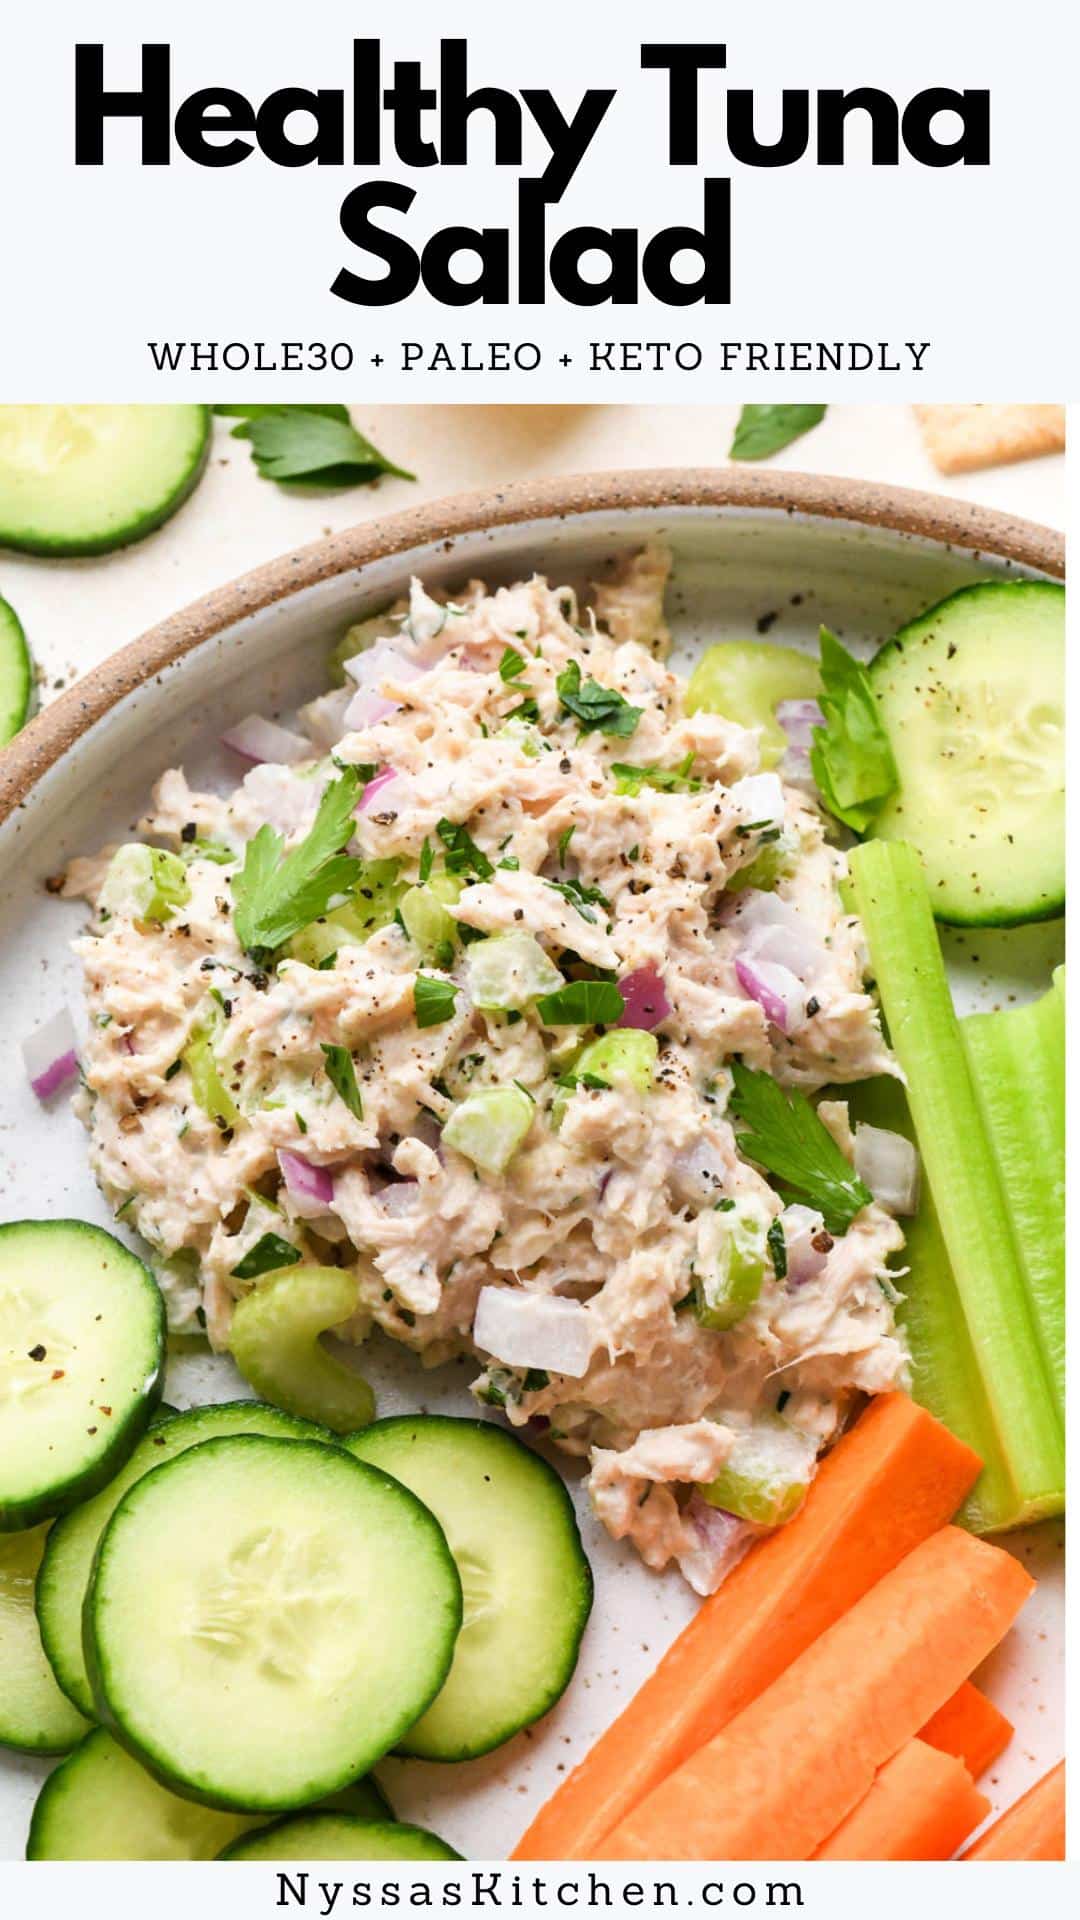 This healthy tuna salad is loaded with protein, veggies, and healthy fats that are sure to keep you full throughout the day! A classic and flavorful dish that is perfect to make in advance and enjoy throughout the week. Just as delicious on its own as it is on a sandwich or over salad greens. Ready in just 15 minutes!